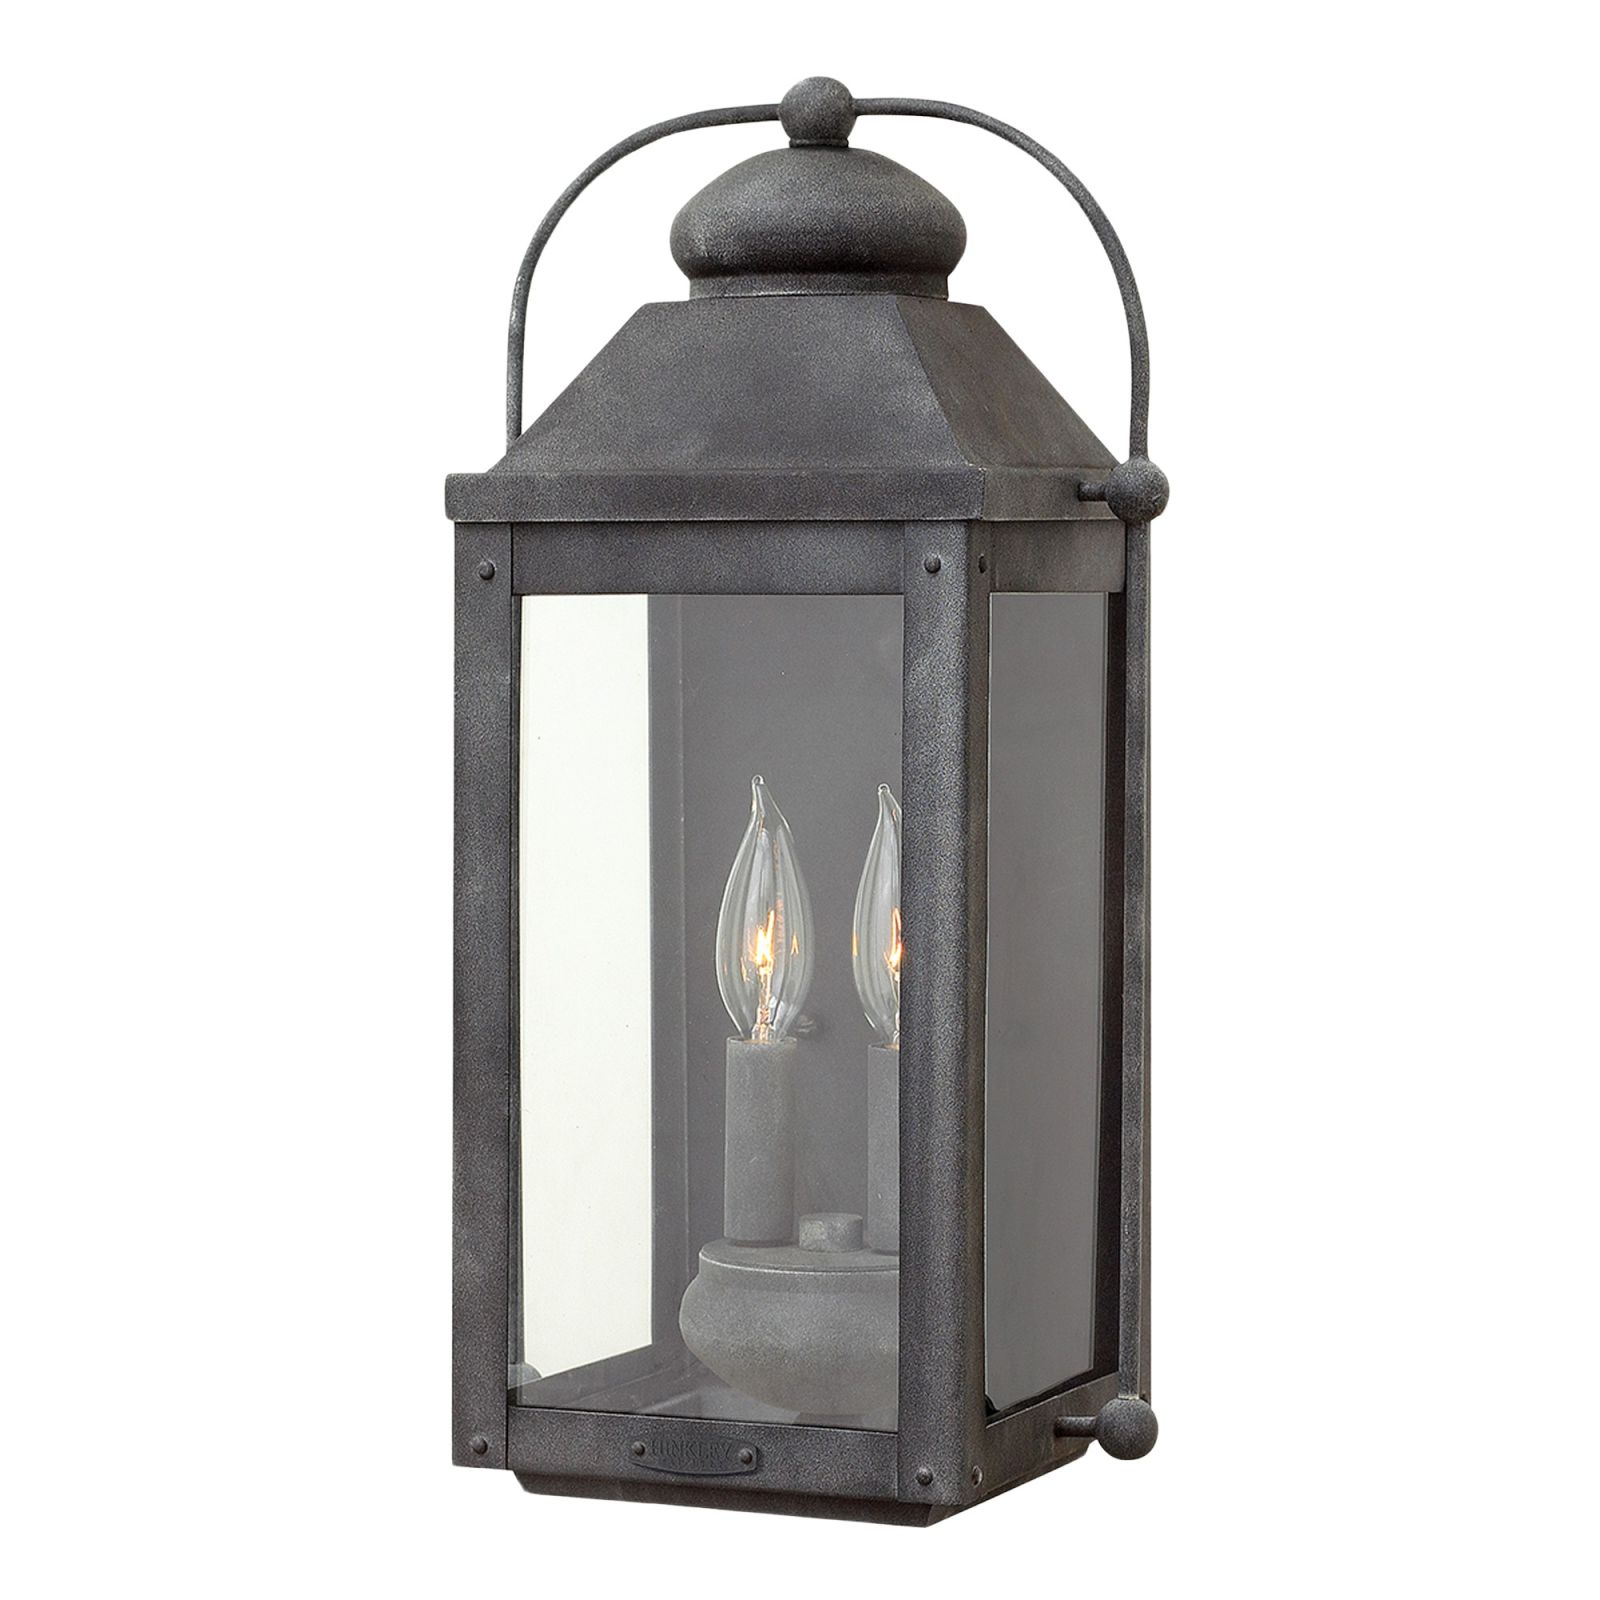 Anchorage Wall Light in a choice of Small or Medium